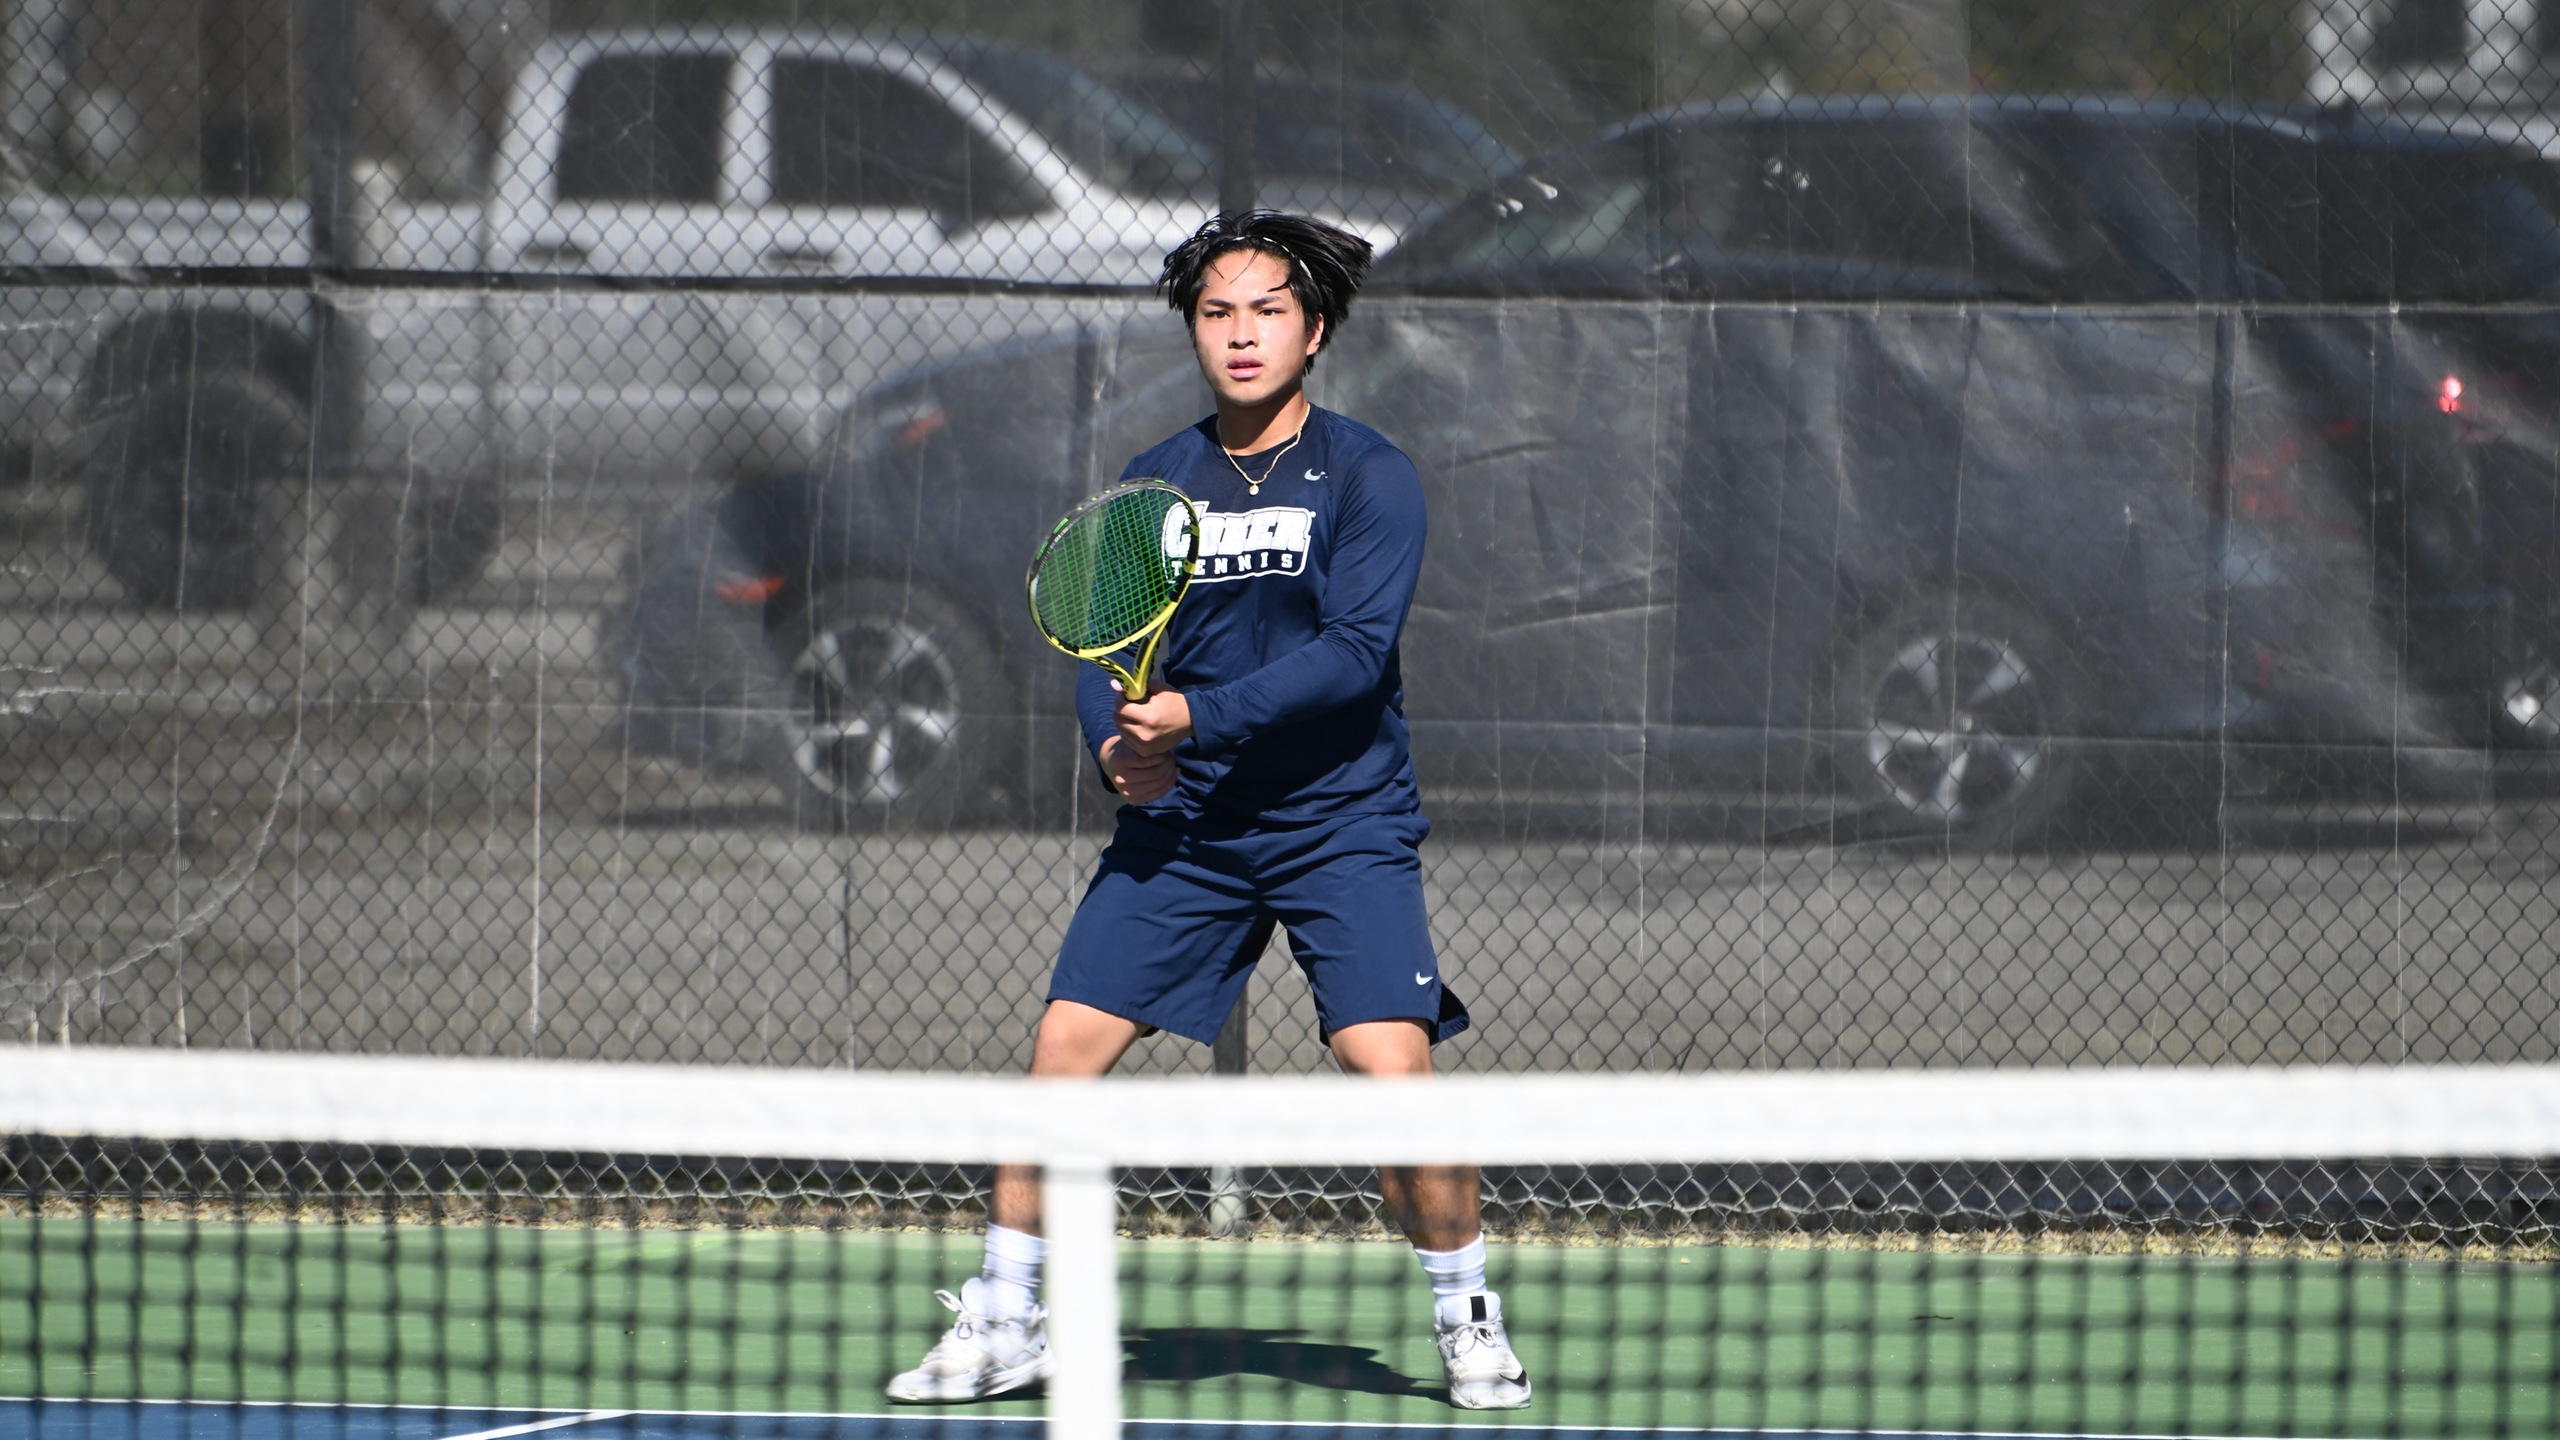 Men’s Tennis Brings Home the Win Against the Cavaliers